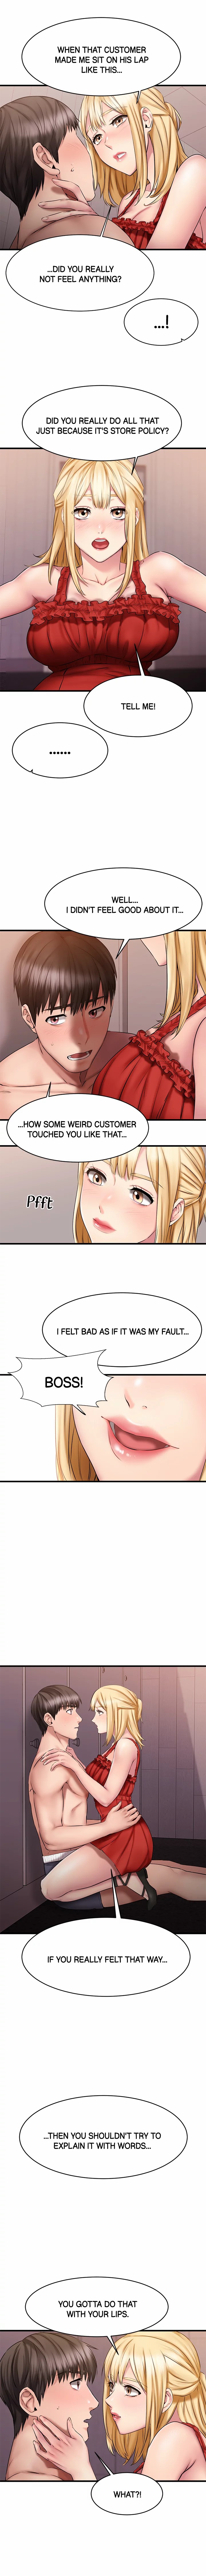 My Female Friend Who Crossed The Line - Chapter 12 Page 14